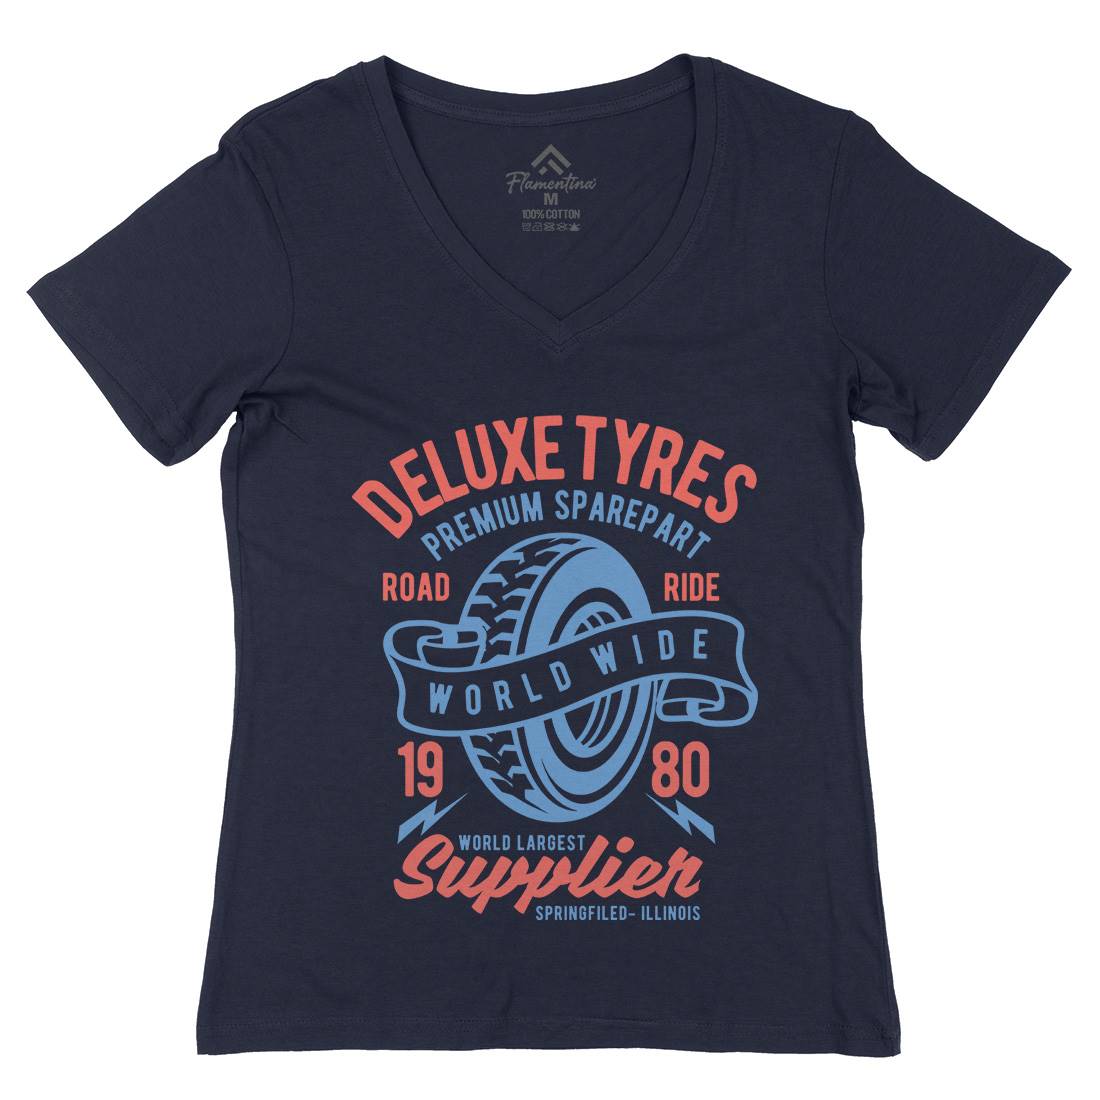 Deluxe Tyres Womens Organic V-Neck T-Shirt Cars B204